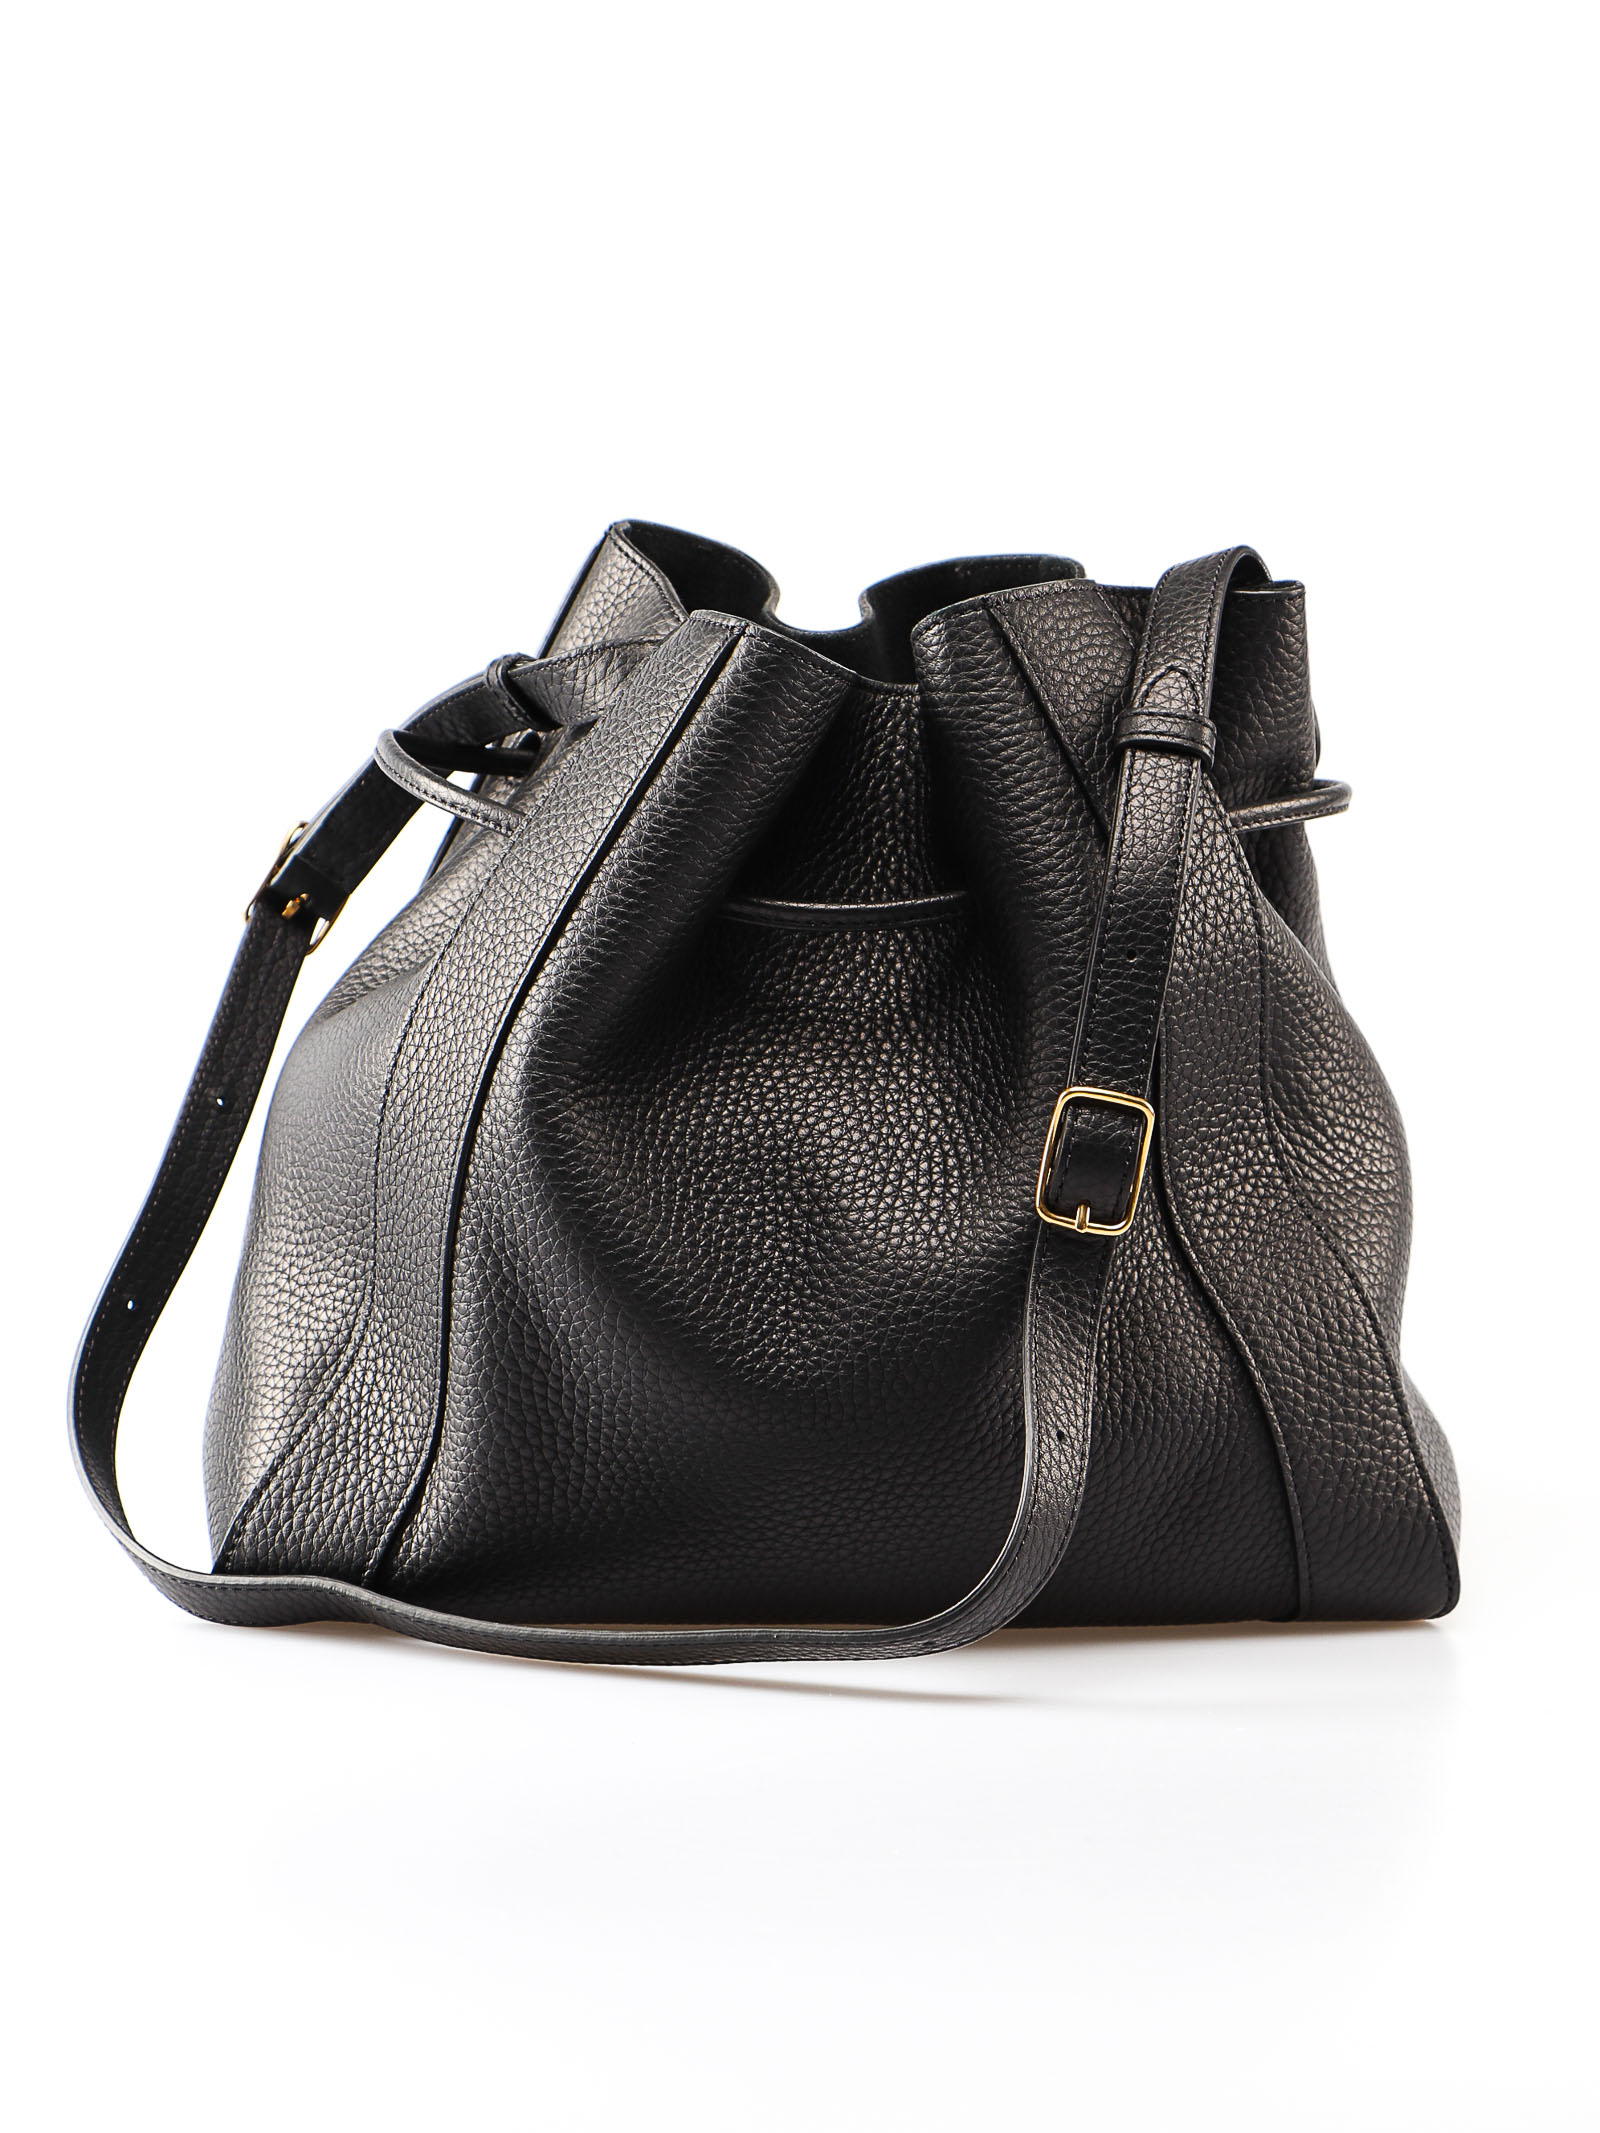 Mulberry Mulberry Small Millie Tote Bag - Black - 10952210 | italist